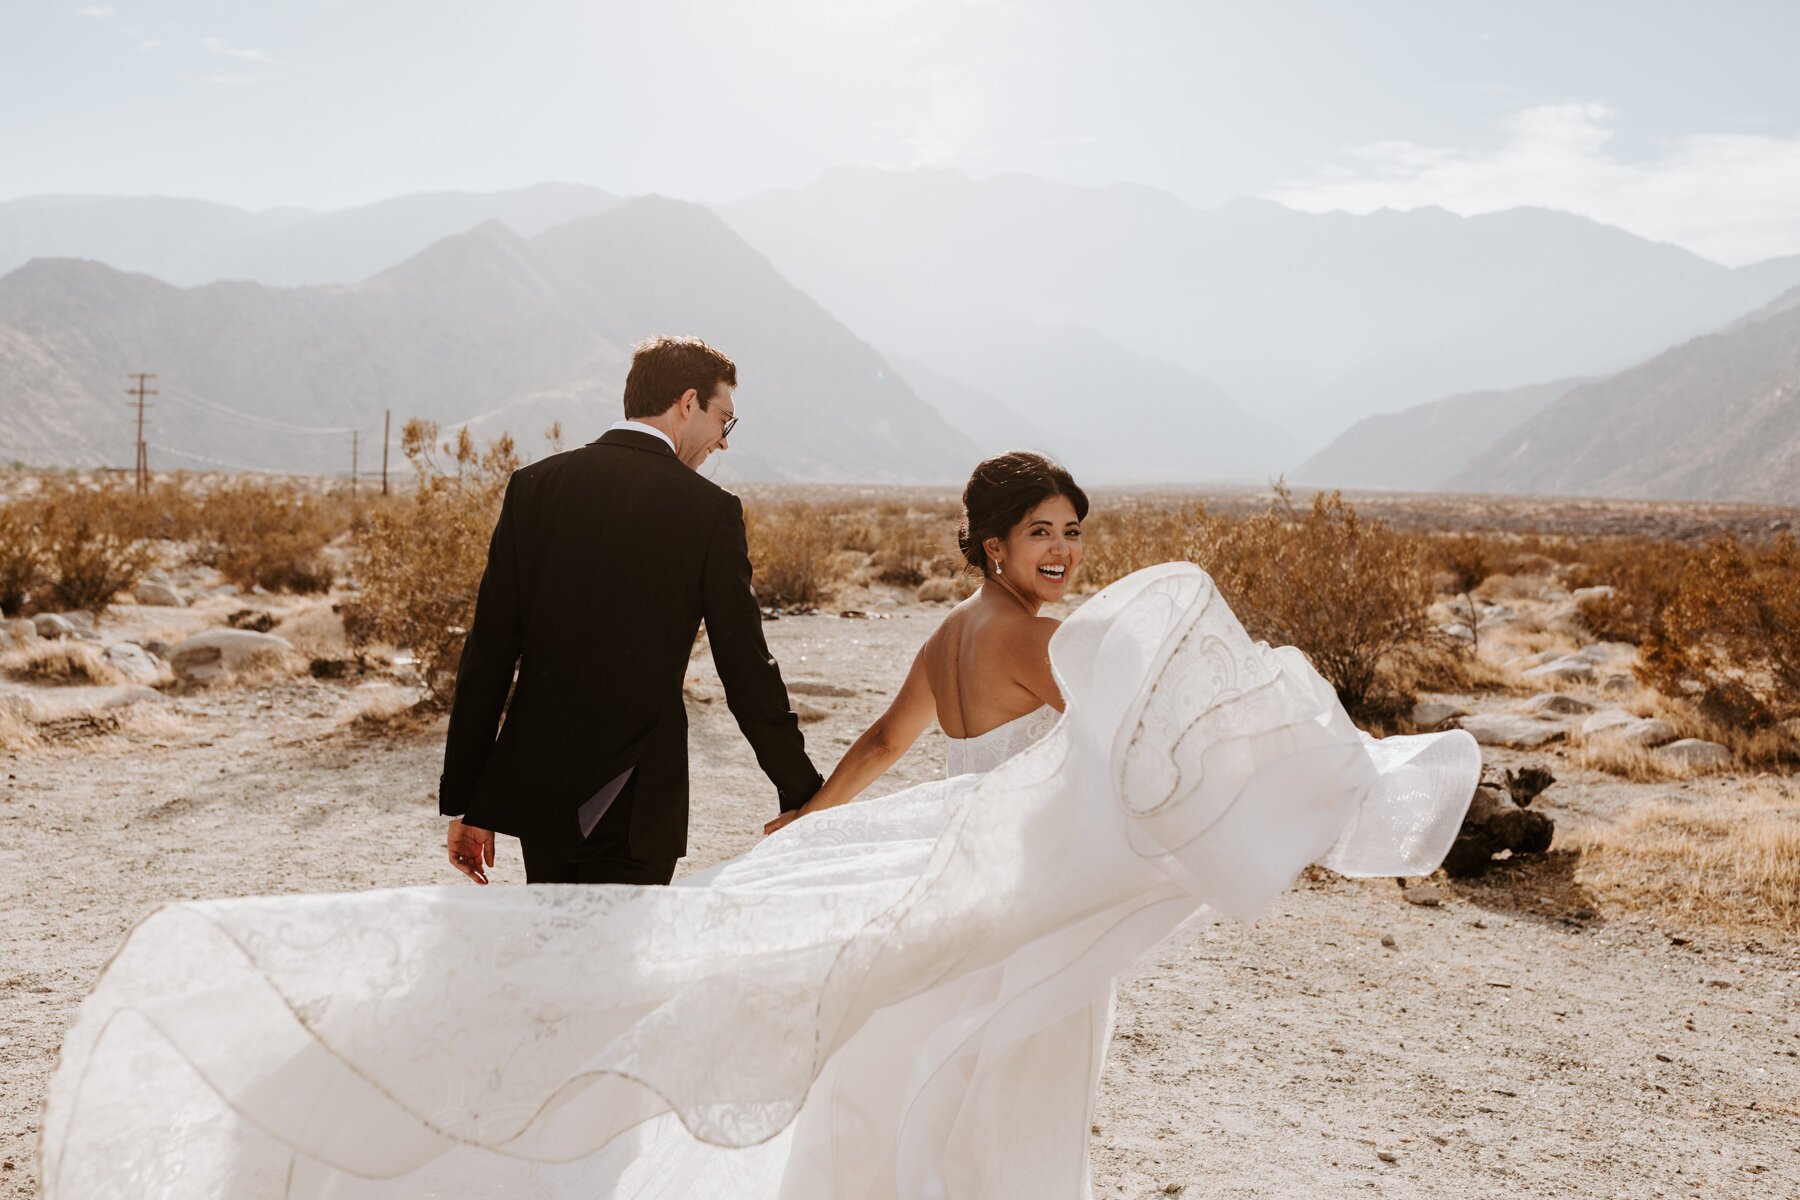 Bride and Groom running into the desert, wedding dress flowing, Palm Springs Wedding and Elopement Photographer, Photo by Tida Svy